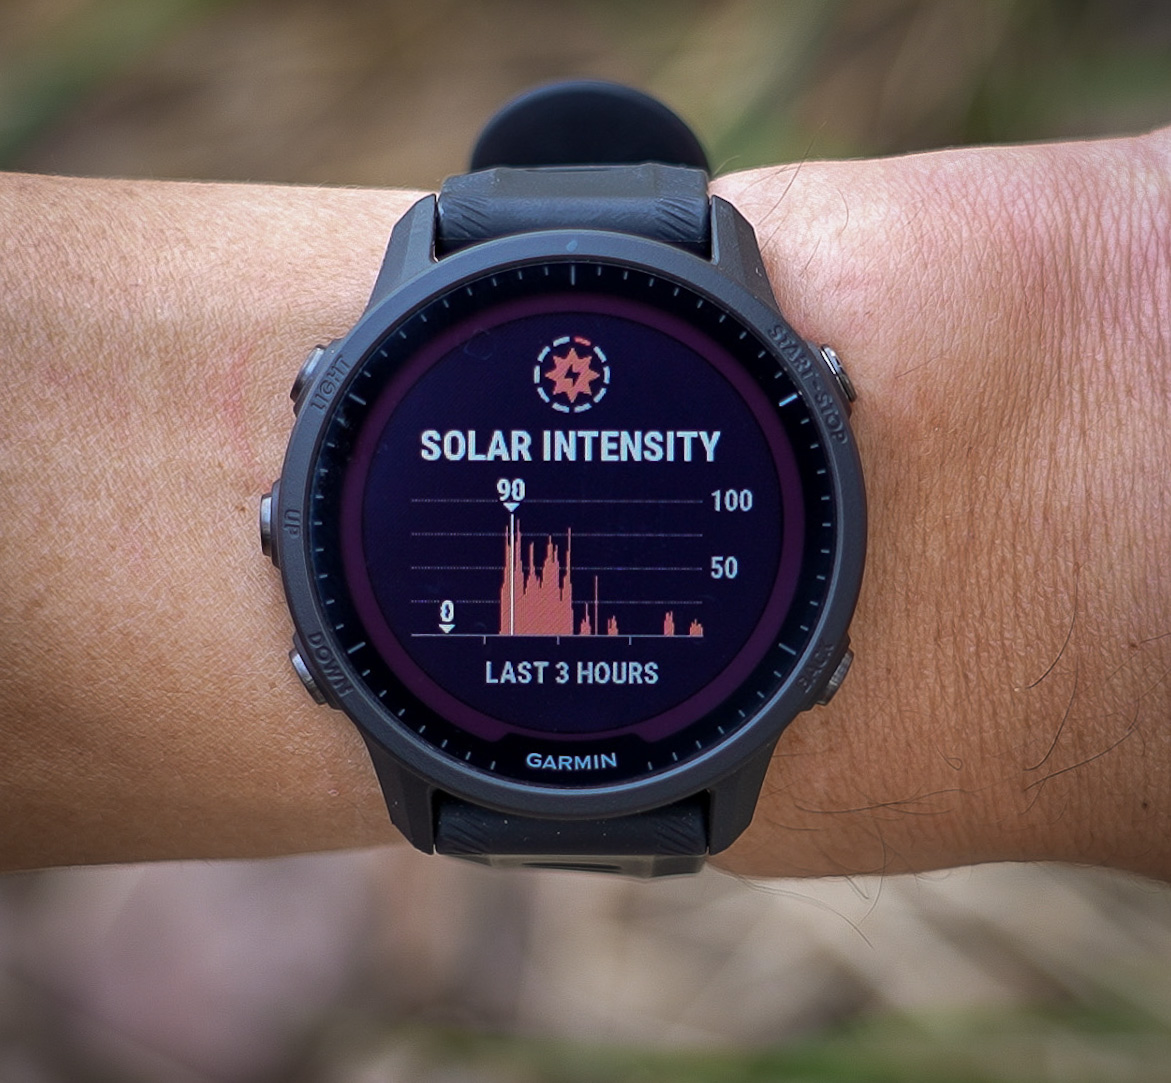 gøre det muligt for Ødelægge Mappe Des Yap (DesFit) on Twitter: "Garmin also launches the new Forerunner 955  Solar with nearly all the features of the Garmin Fenix 7 but also adds some  new and exciting health and